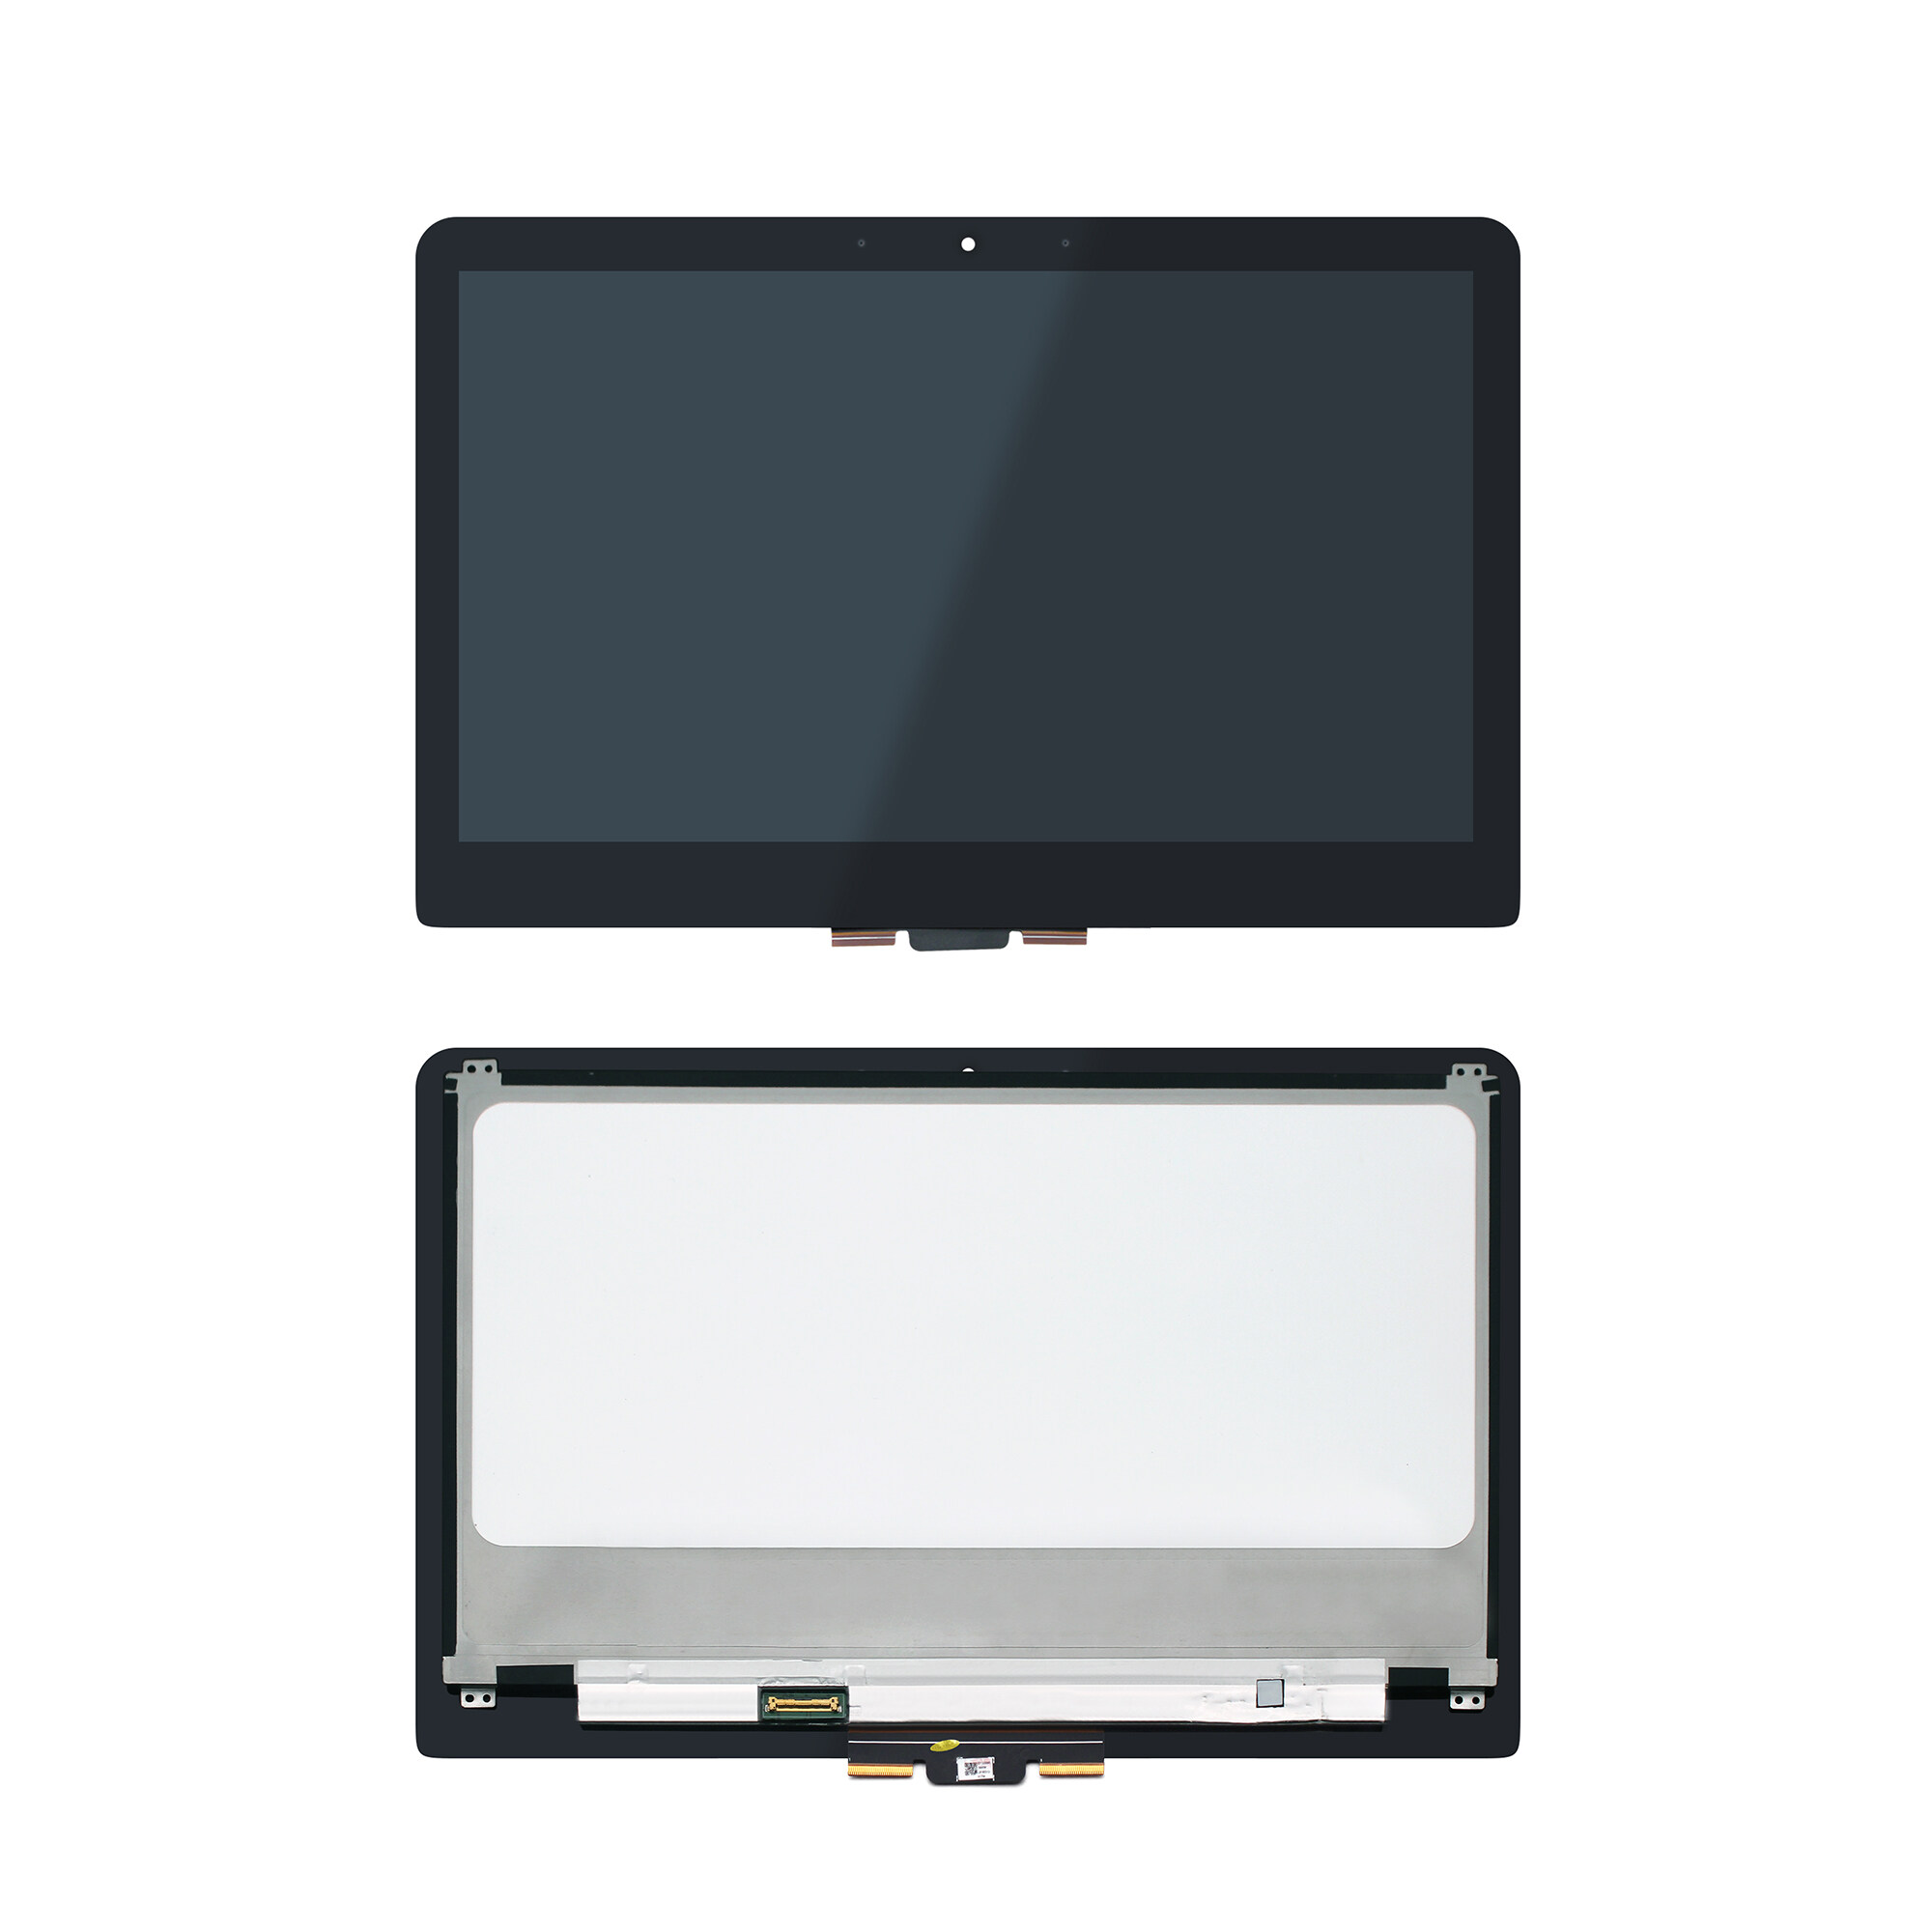 Kreplacement 13.3" FHD LCD Screen Touch Assembly 801495-001 for HP Spectre 13-4000 13-4003DX 13-4002DX